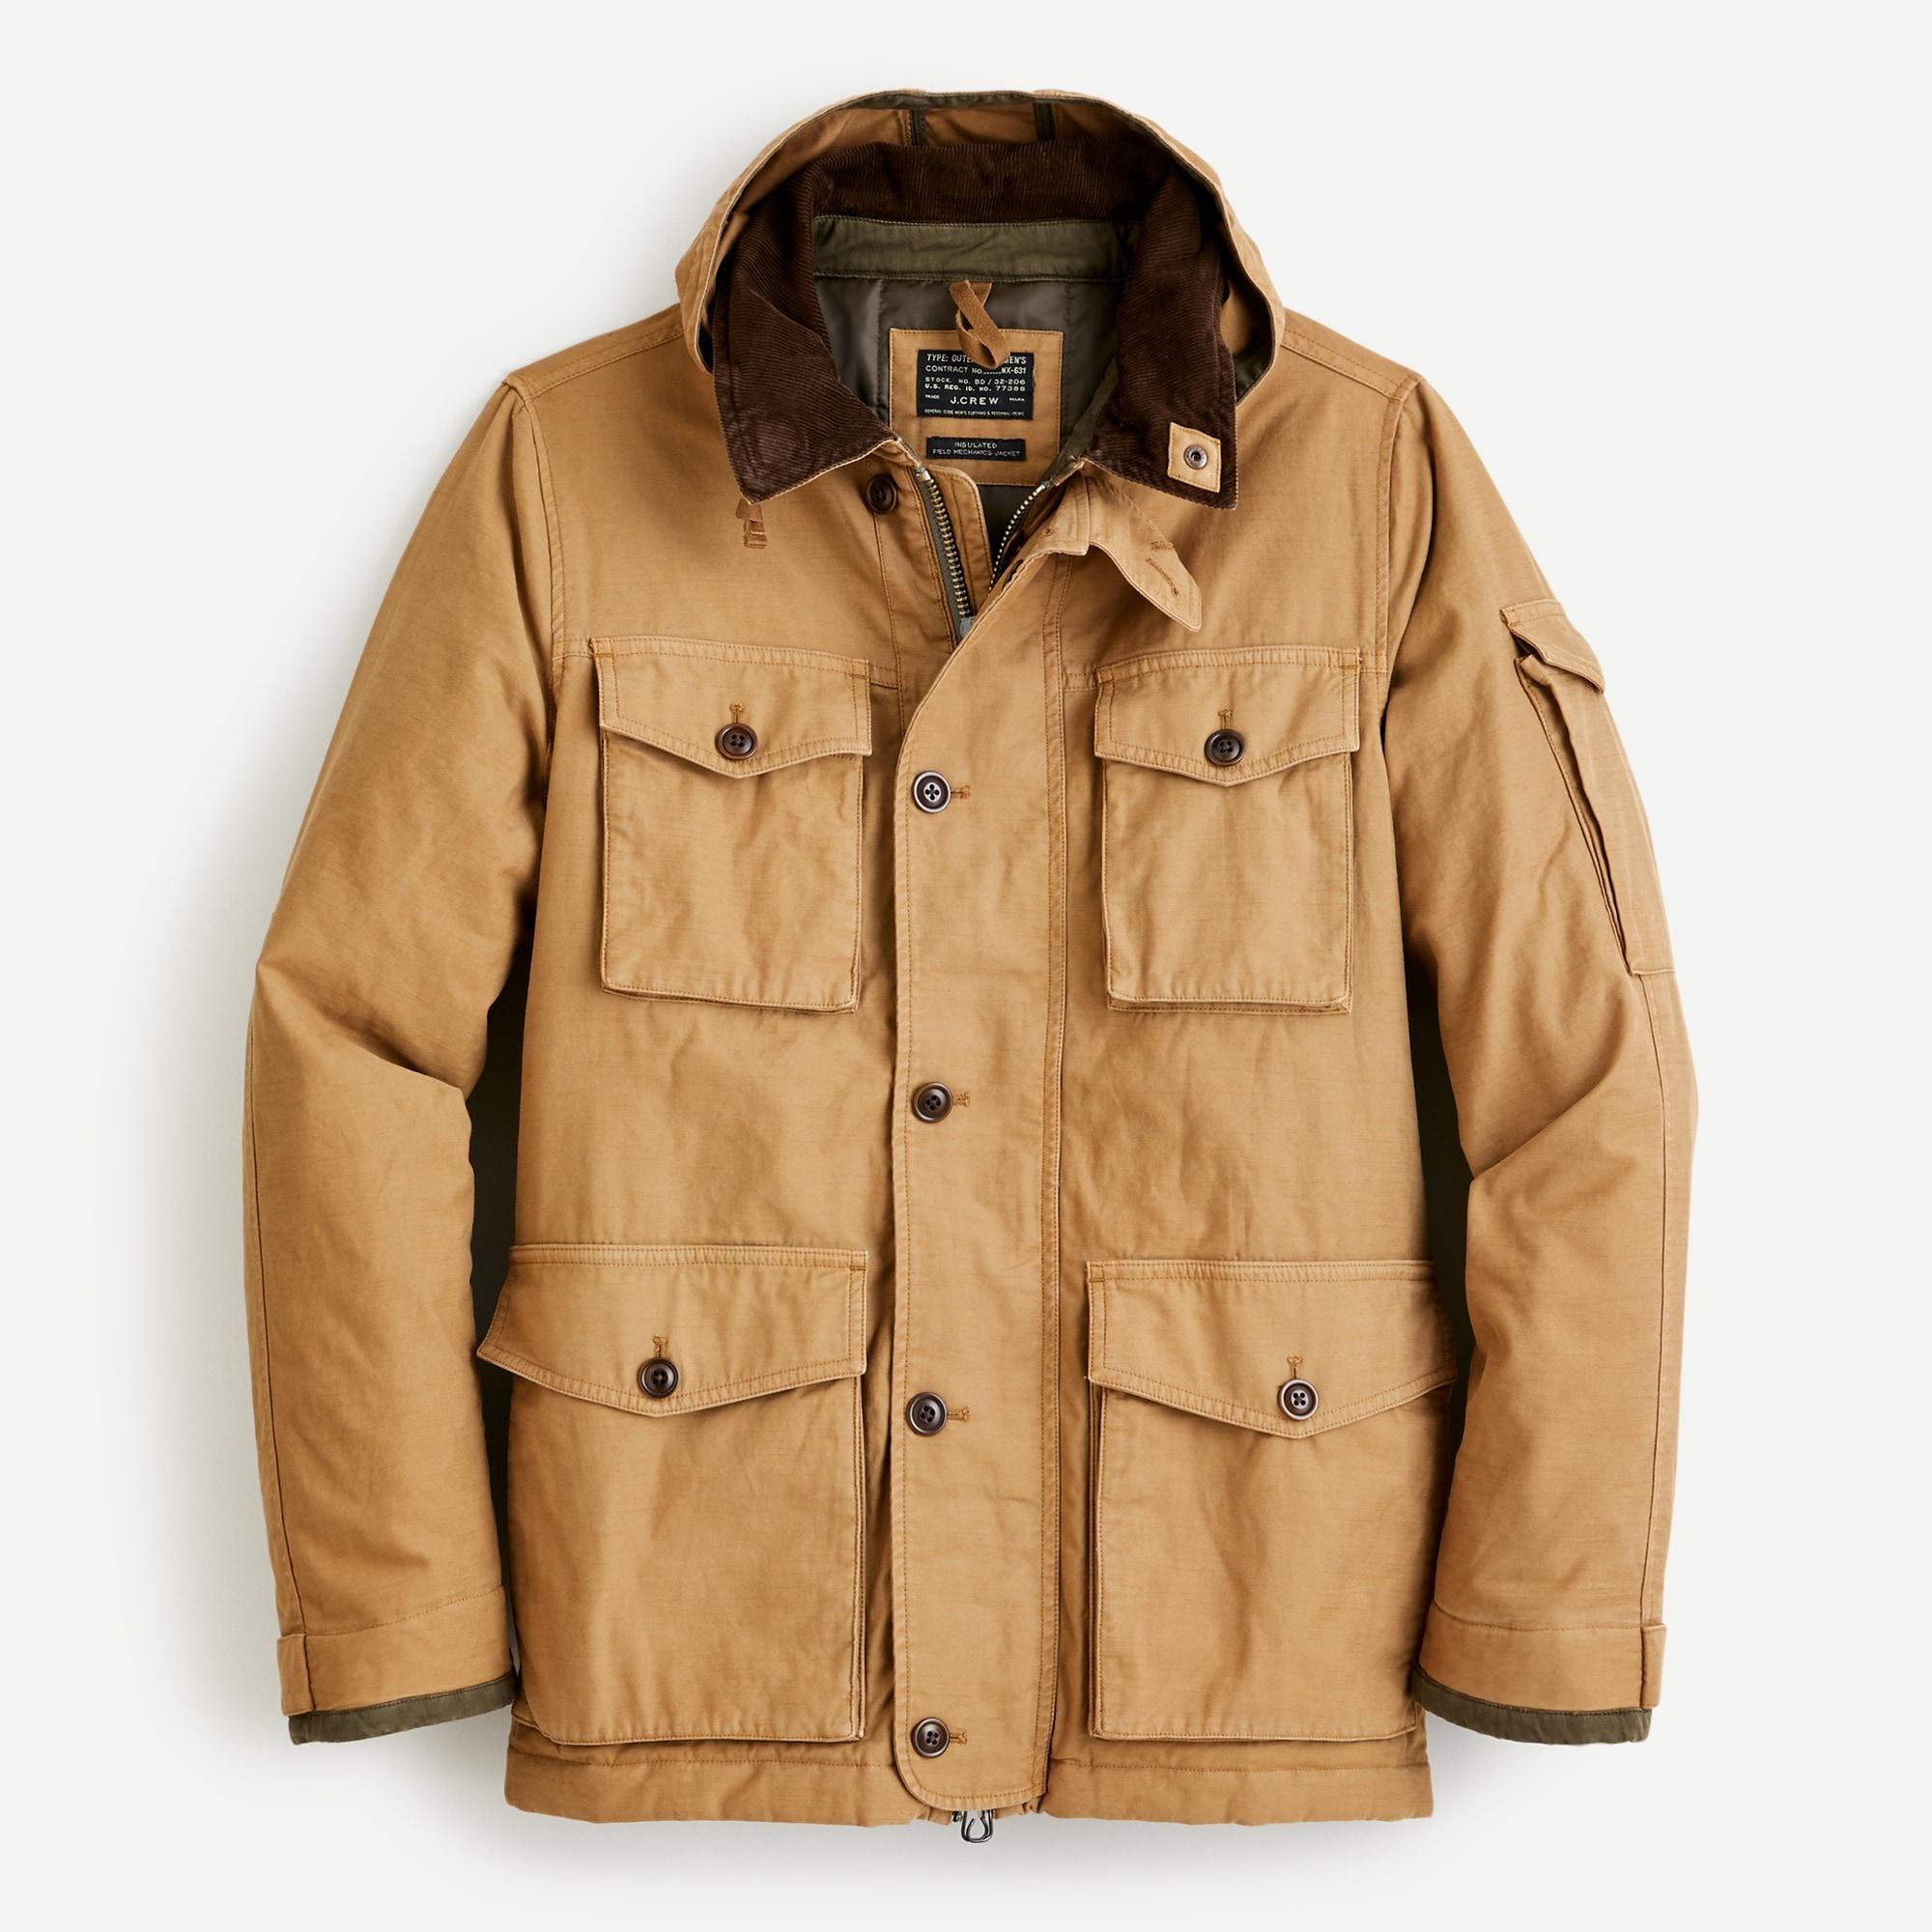 J.Crew Cotton Insulated Field Mechanic Jacket for Men - Lyst